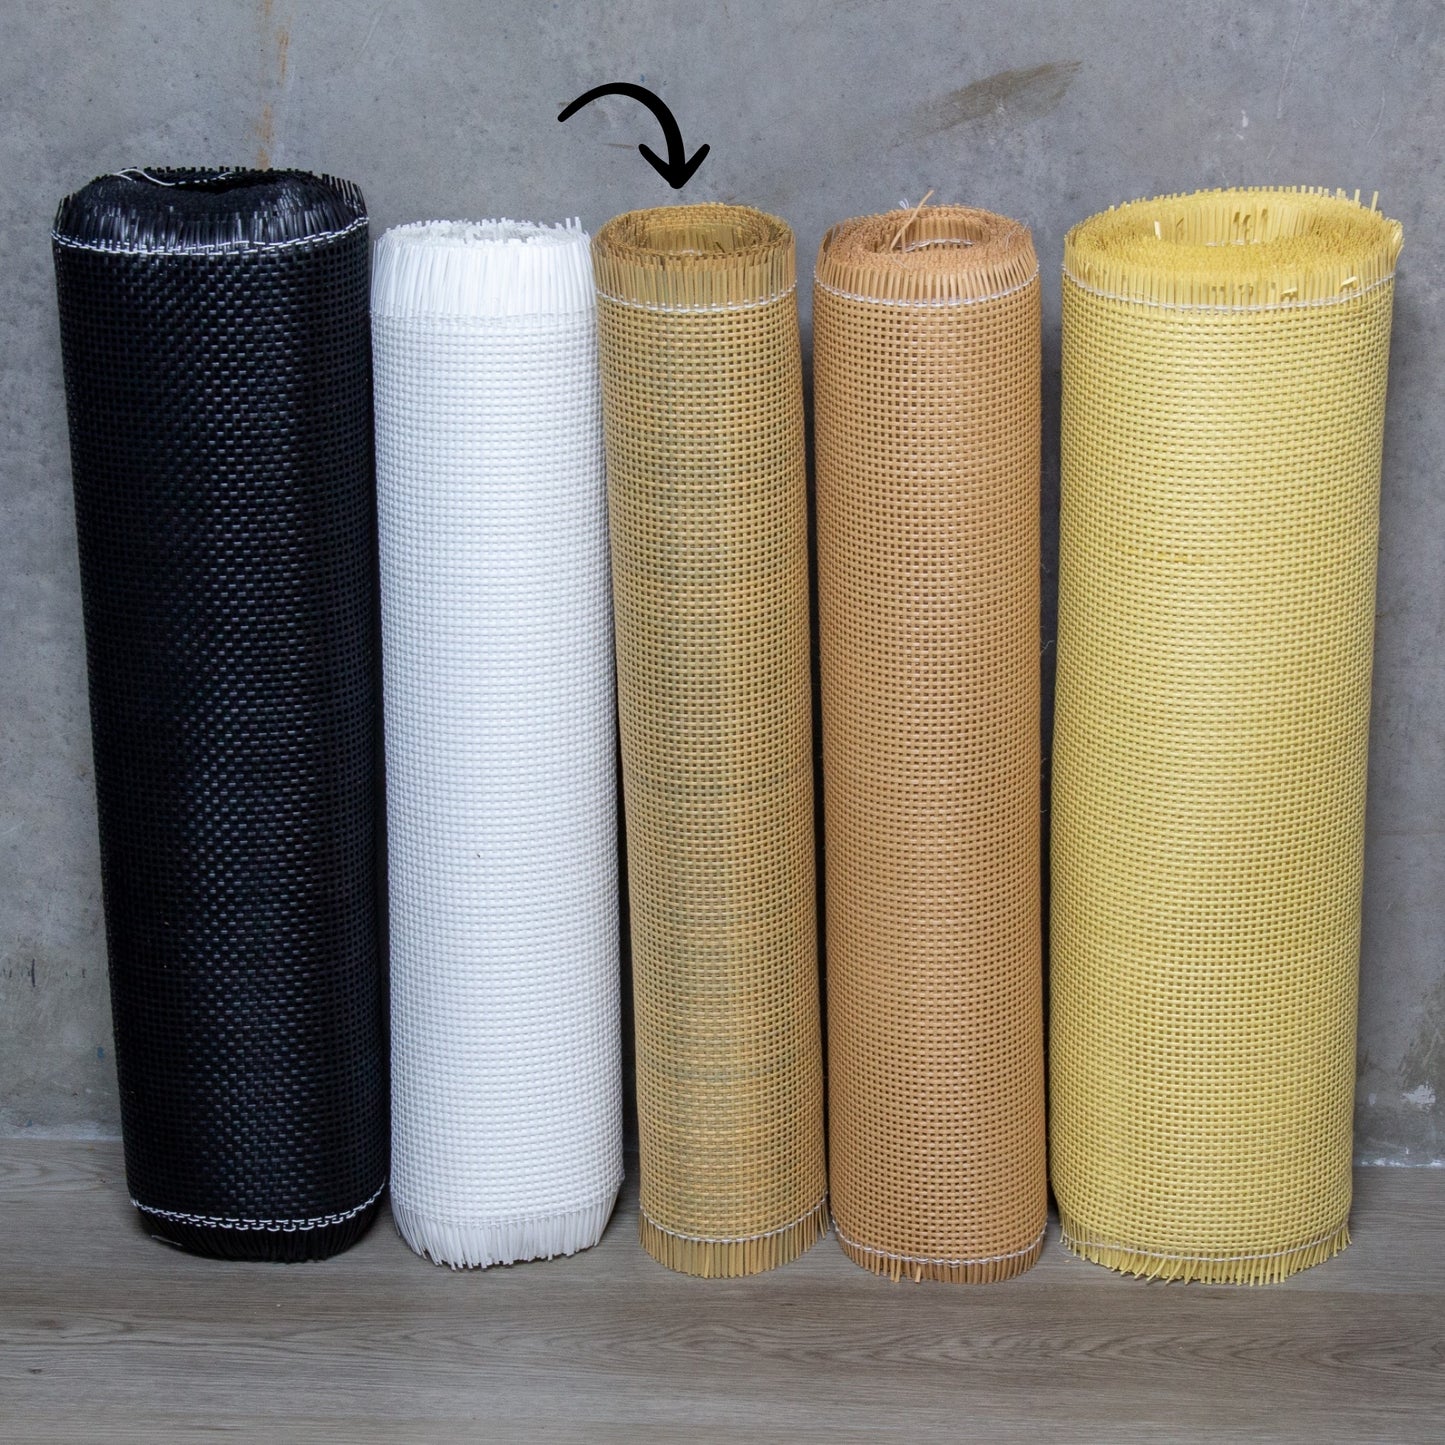 Plastic-Synthetic-Faux-PE-Rattan-Cane-Webbing-Mesh-Roll-Panel-Furniture-Chair-Repair-Open-Weave-Square-Radio-Melbourne-Australia-Natural-Brown-4